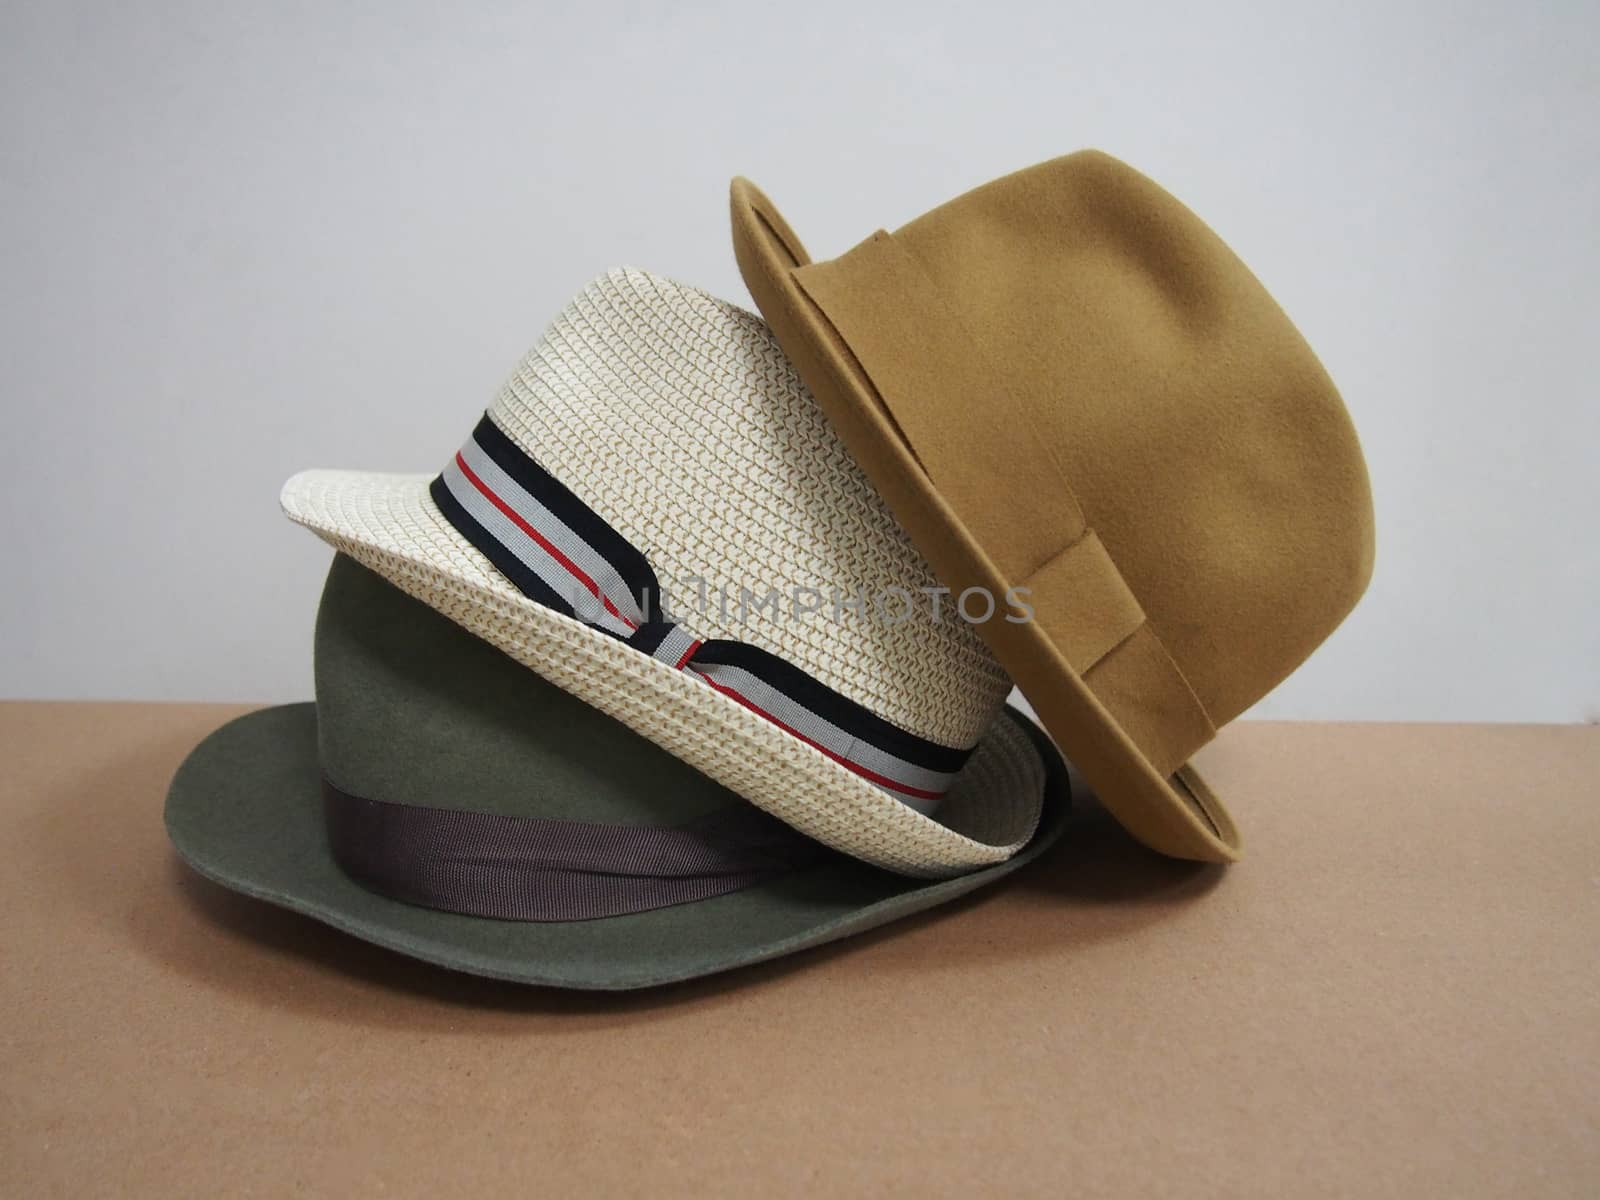 three colored men's hats. on a white background